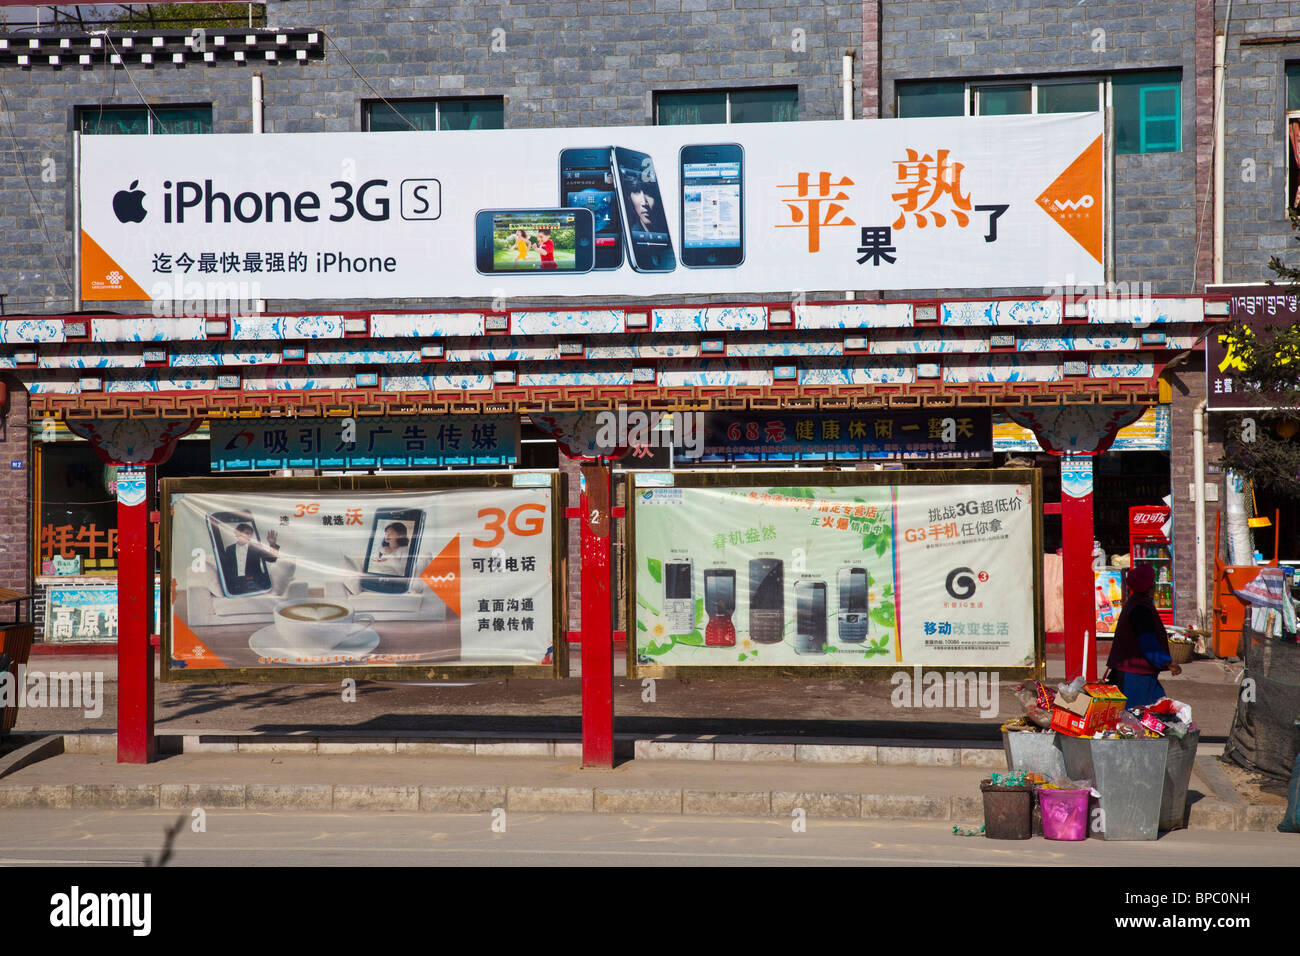 Wireless technology advertising on a bus stand in Shangri-La or Zhongdian in Yunnan Province, China Stock Photo